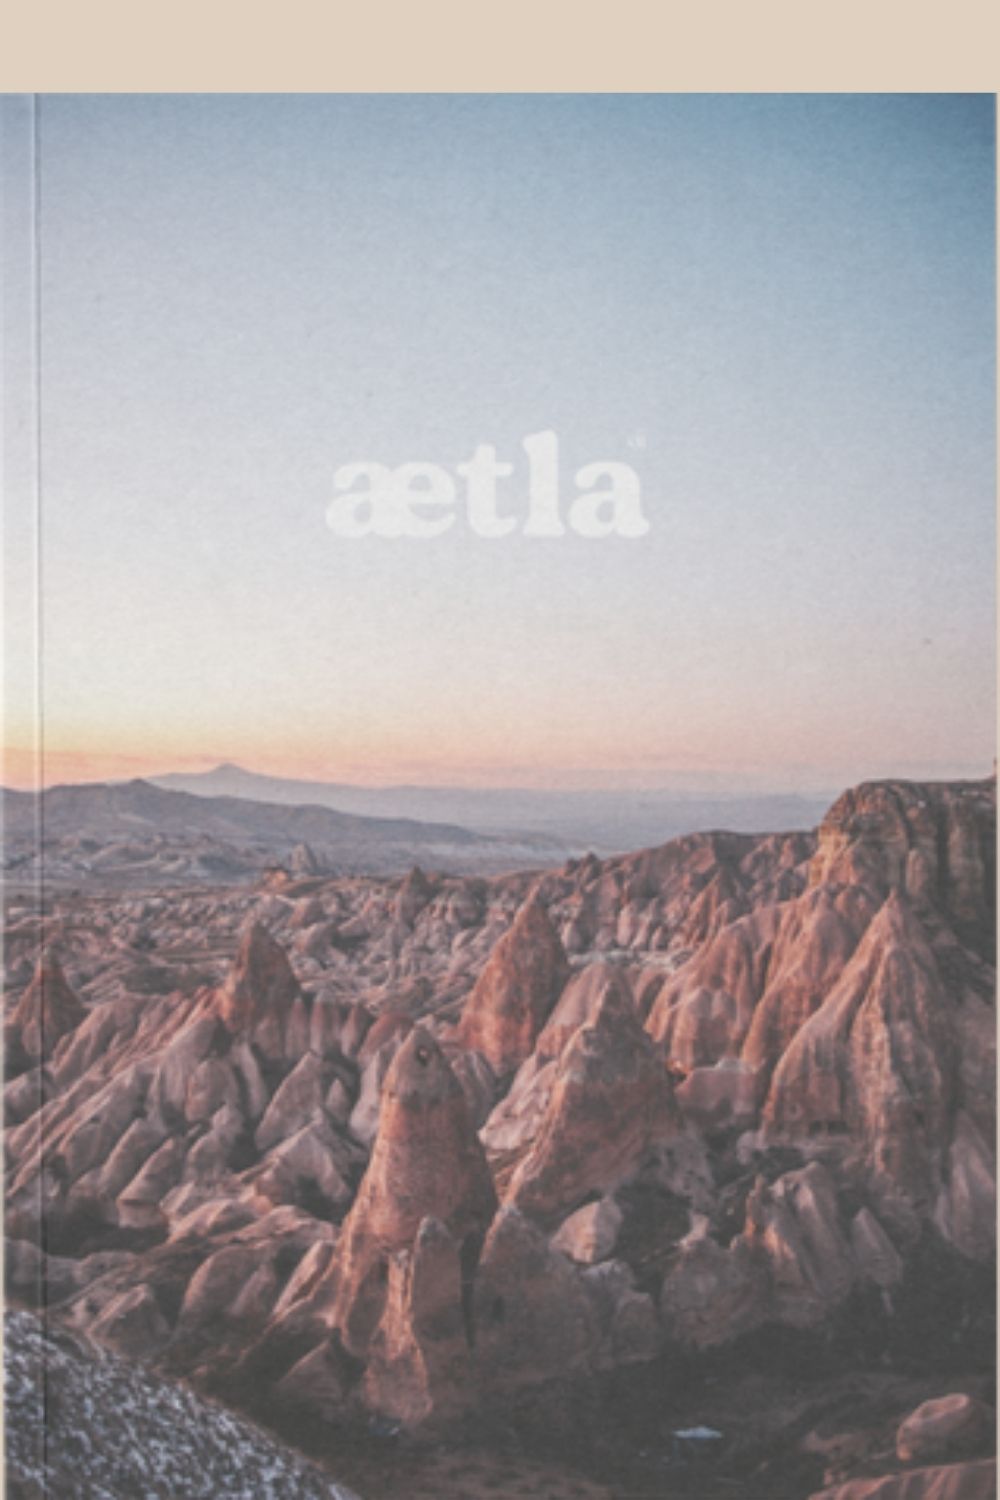 Front cover of Aetla magazine